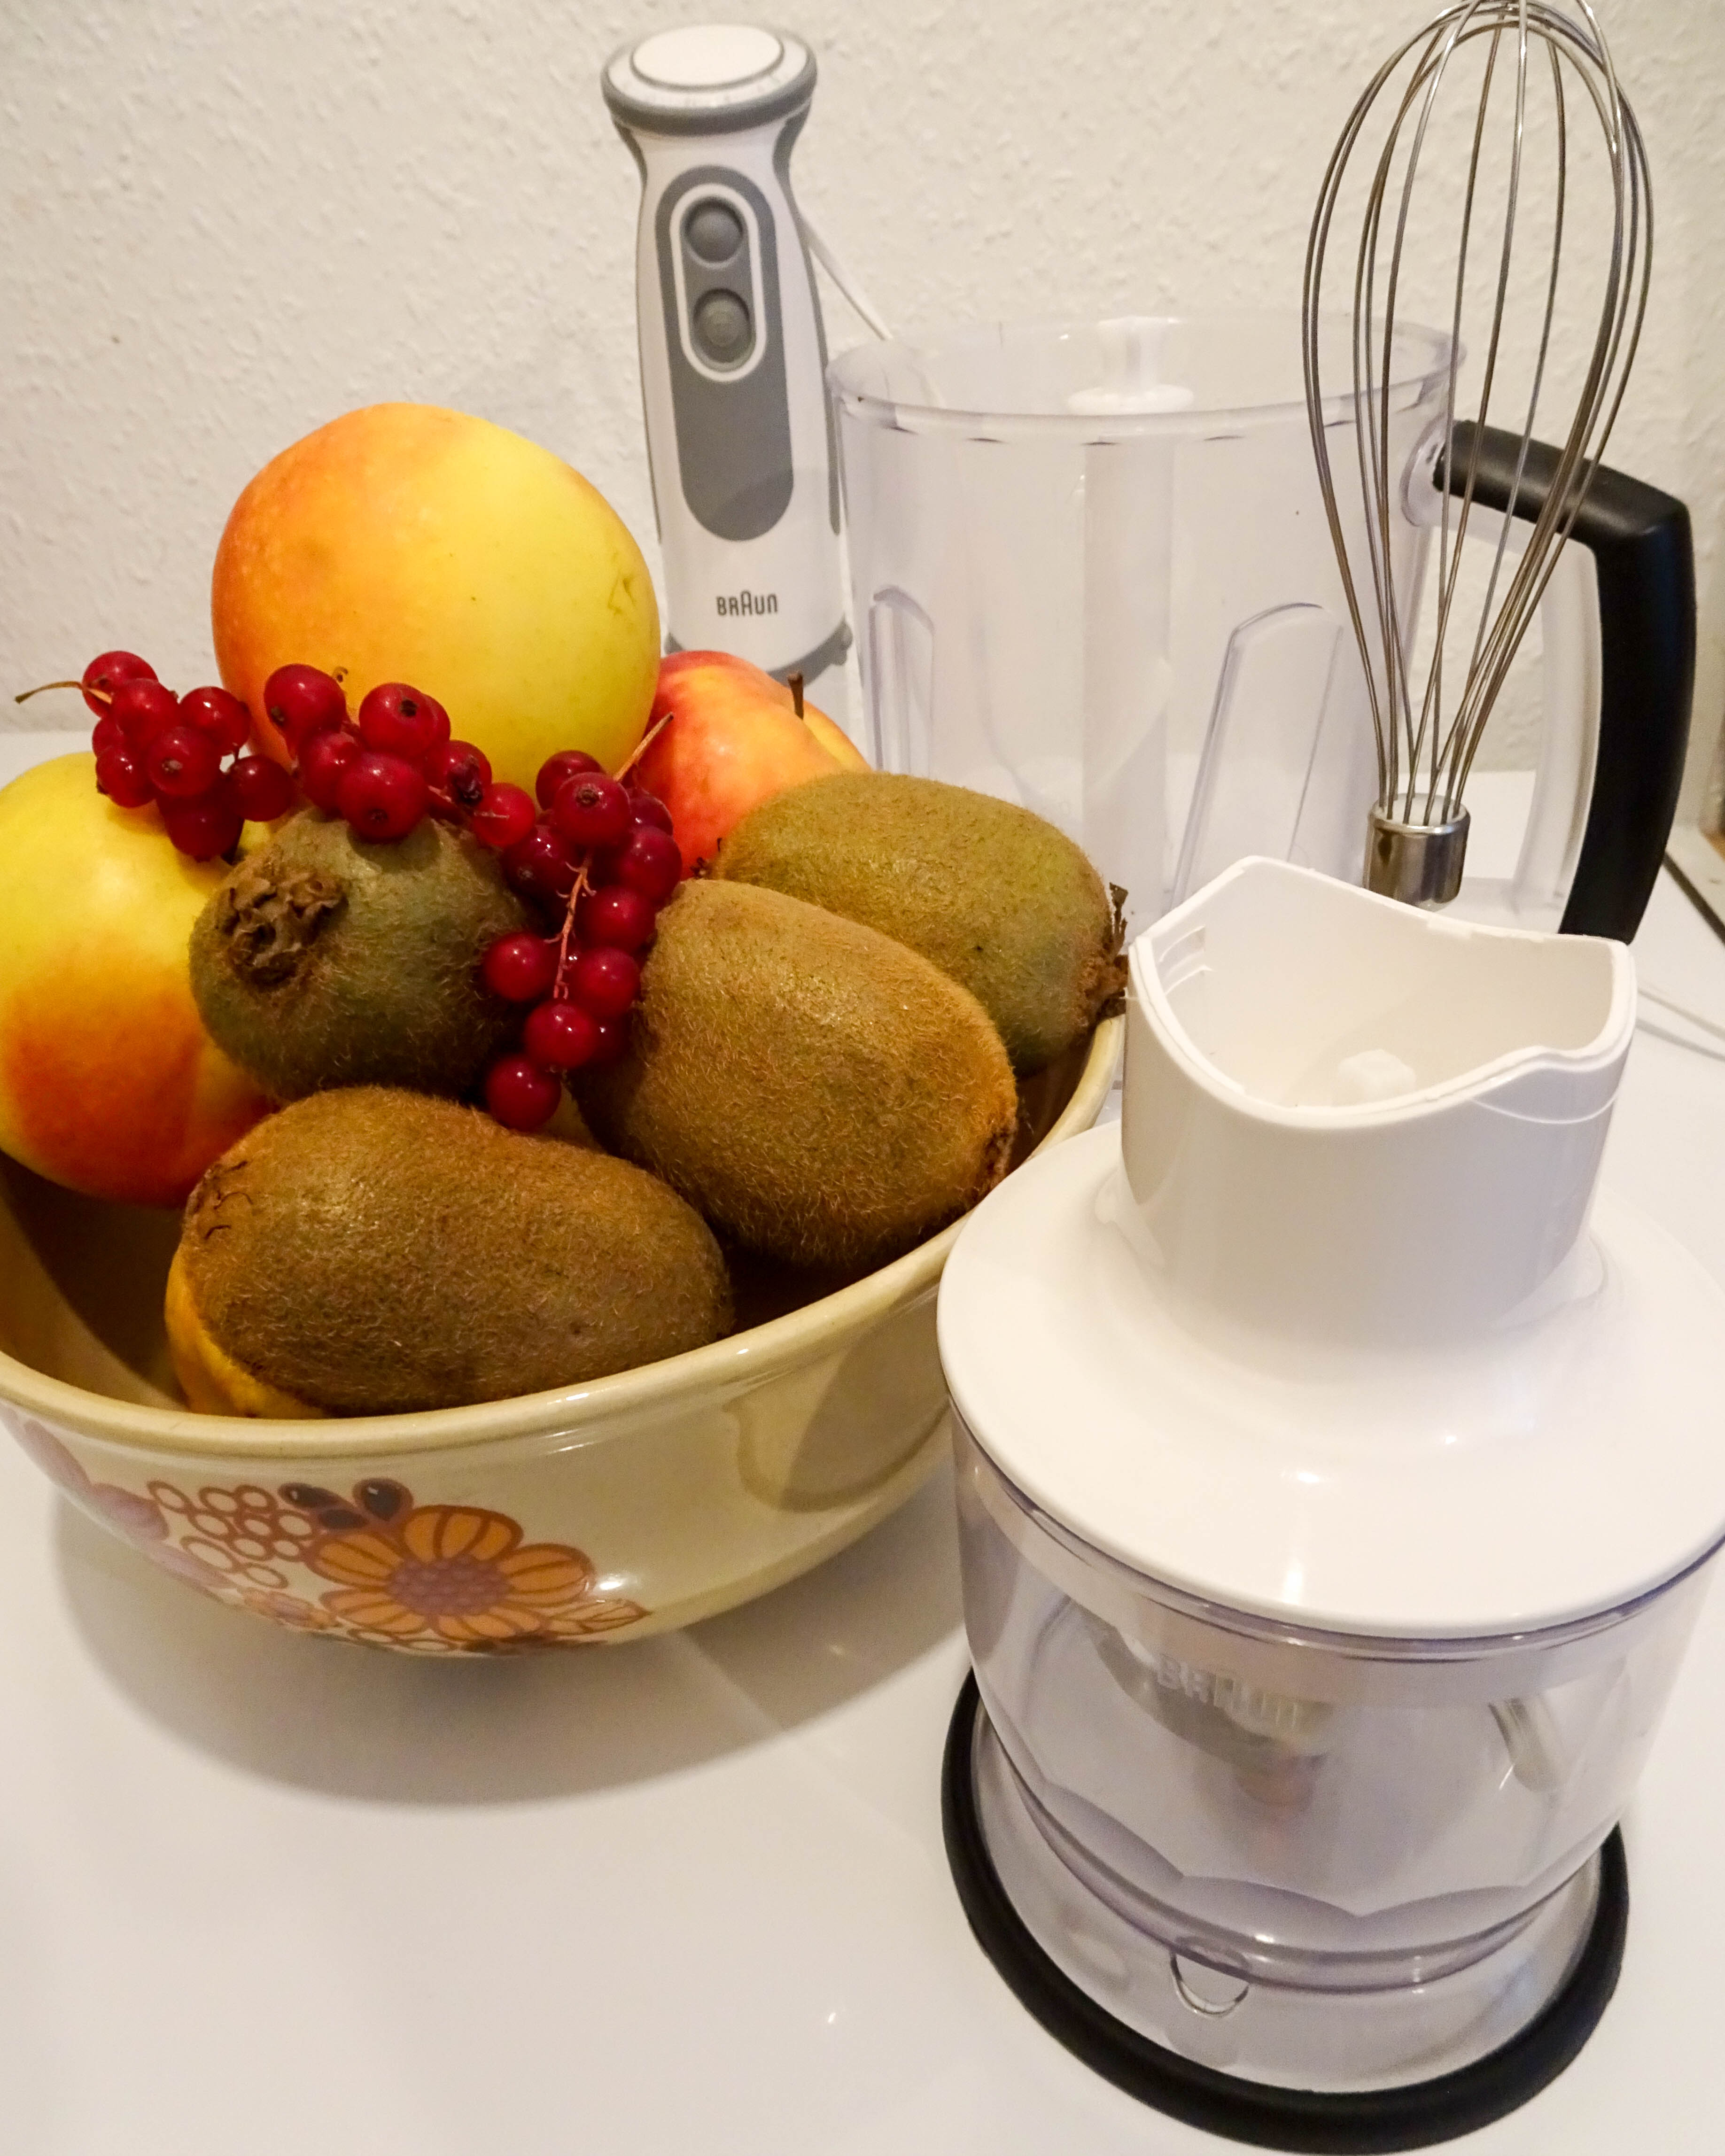 My Braun blender - product review